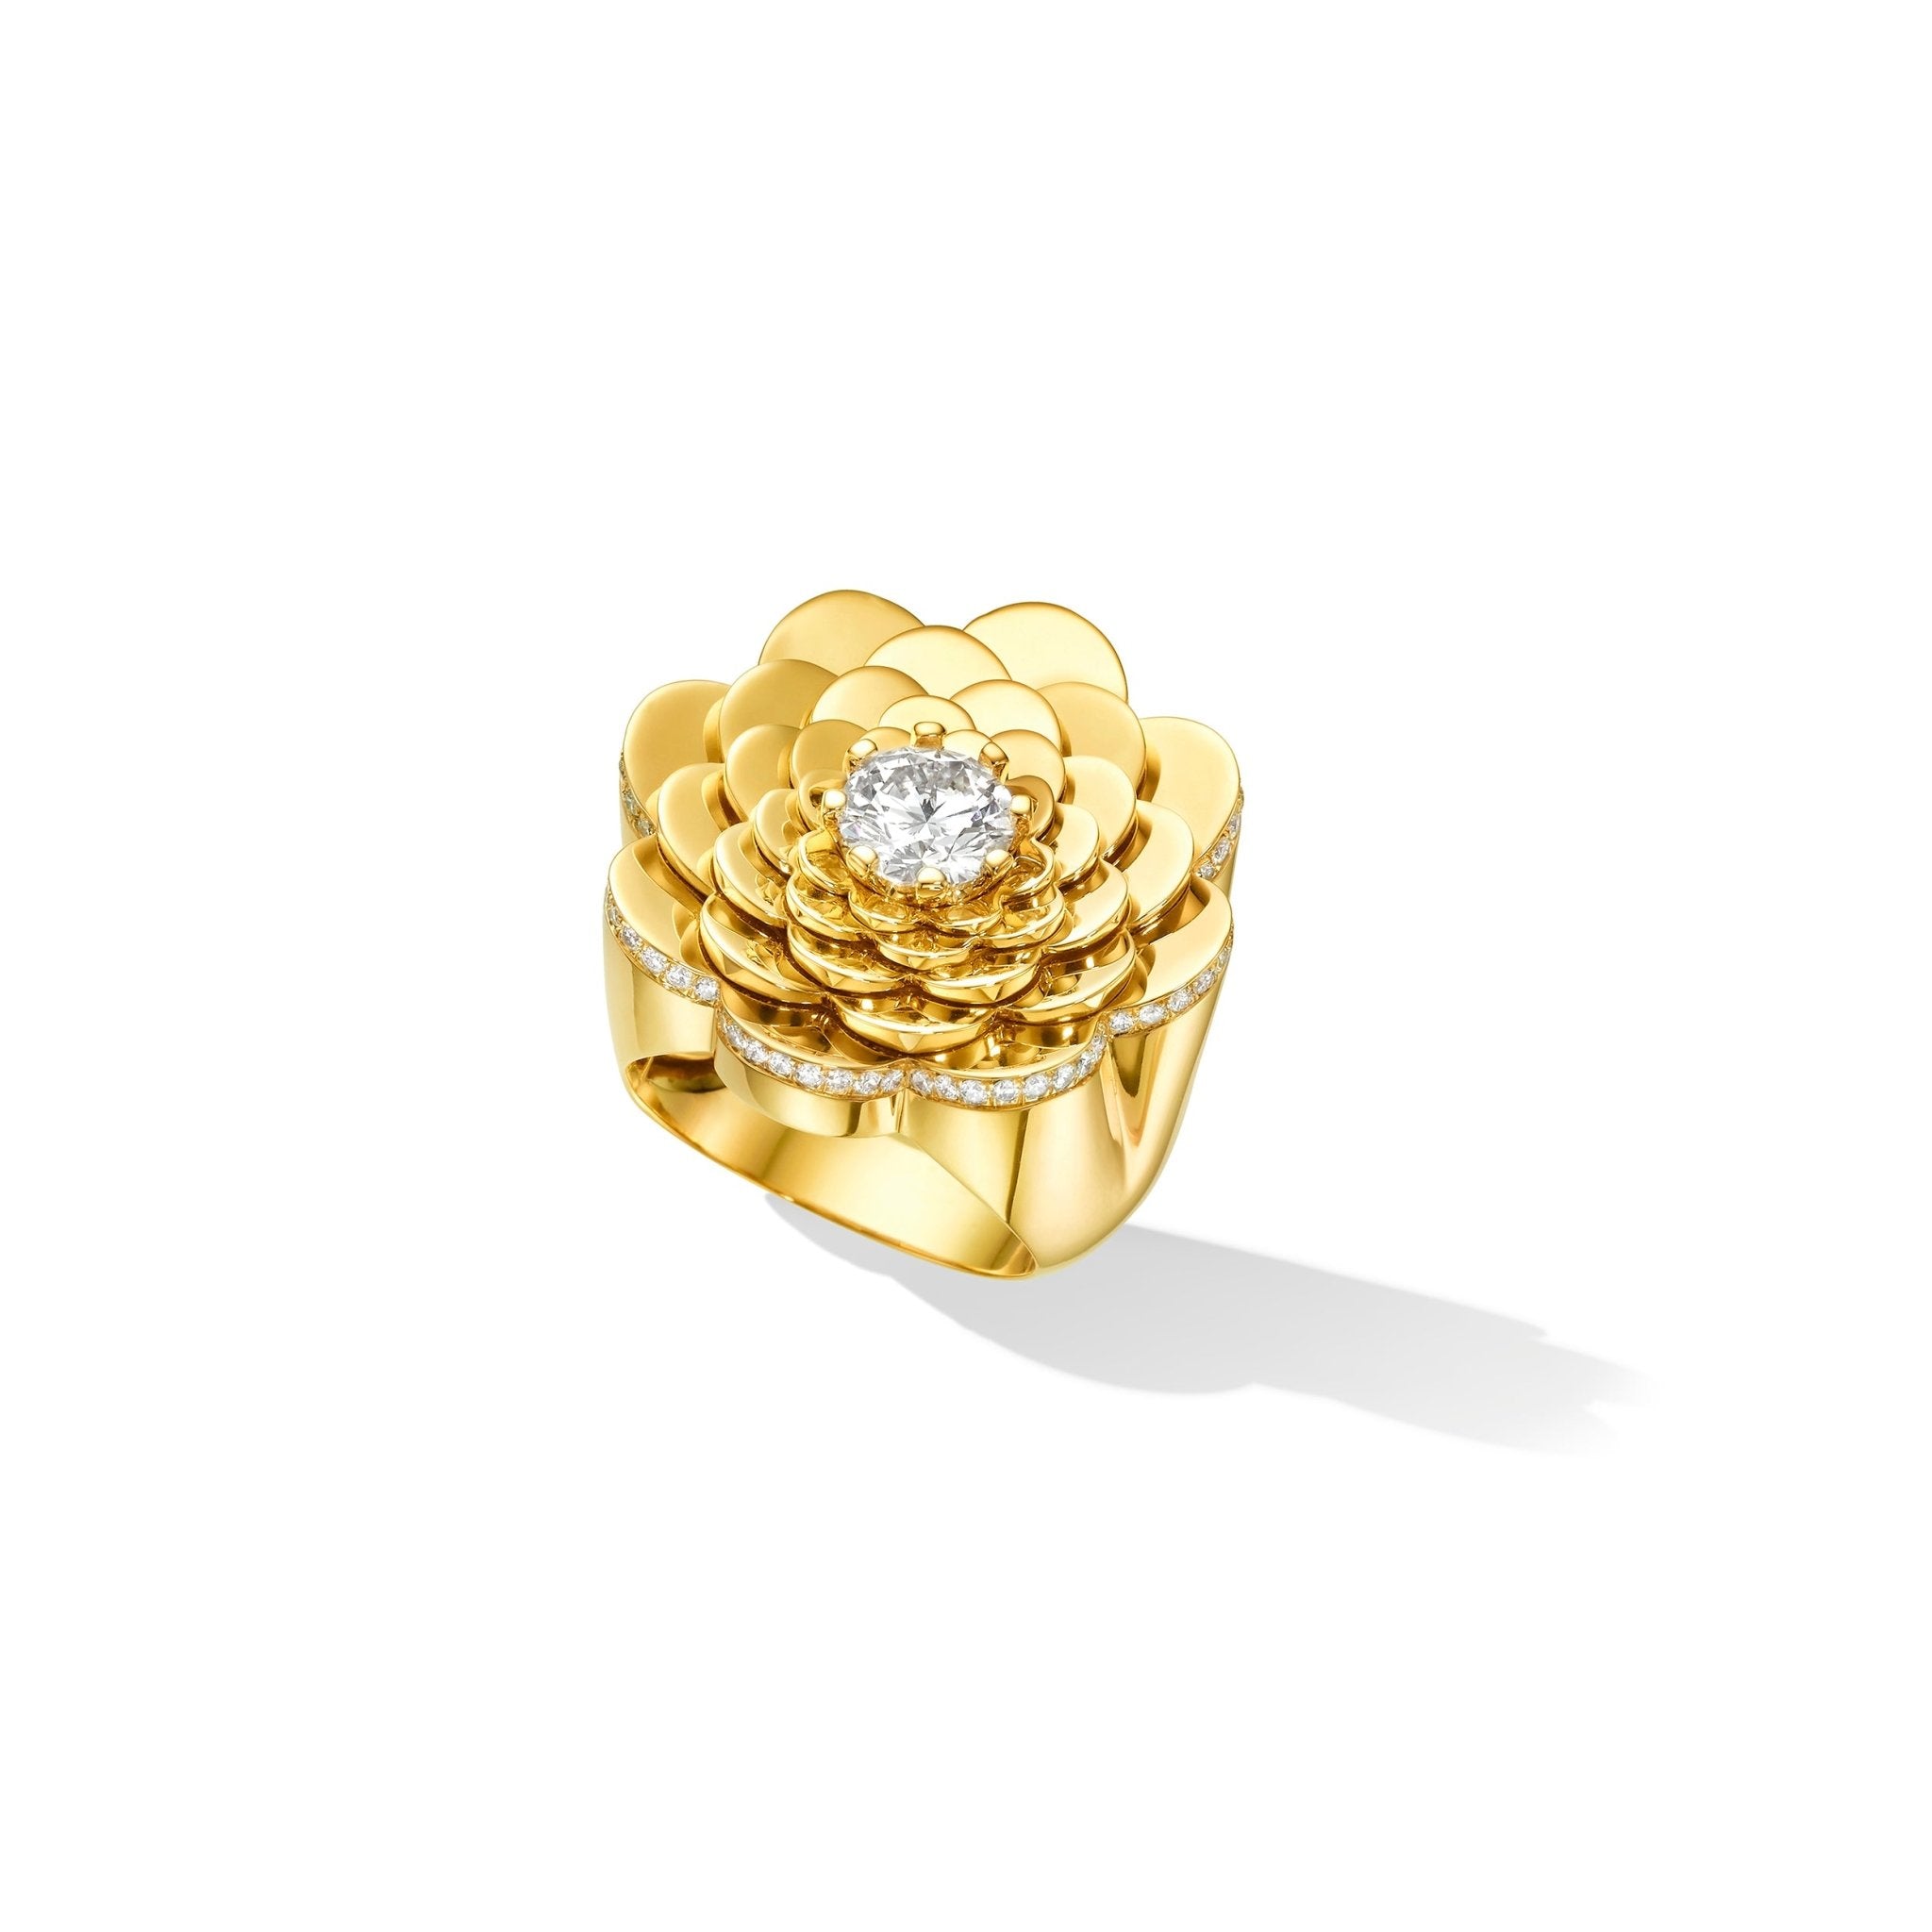 Breath-taking Diamond Statement Ring, Exquisite 18K Solid Gold Diamond Cocktail  Ring, Very Unique Diamond Statement Ring